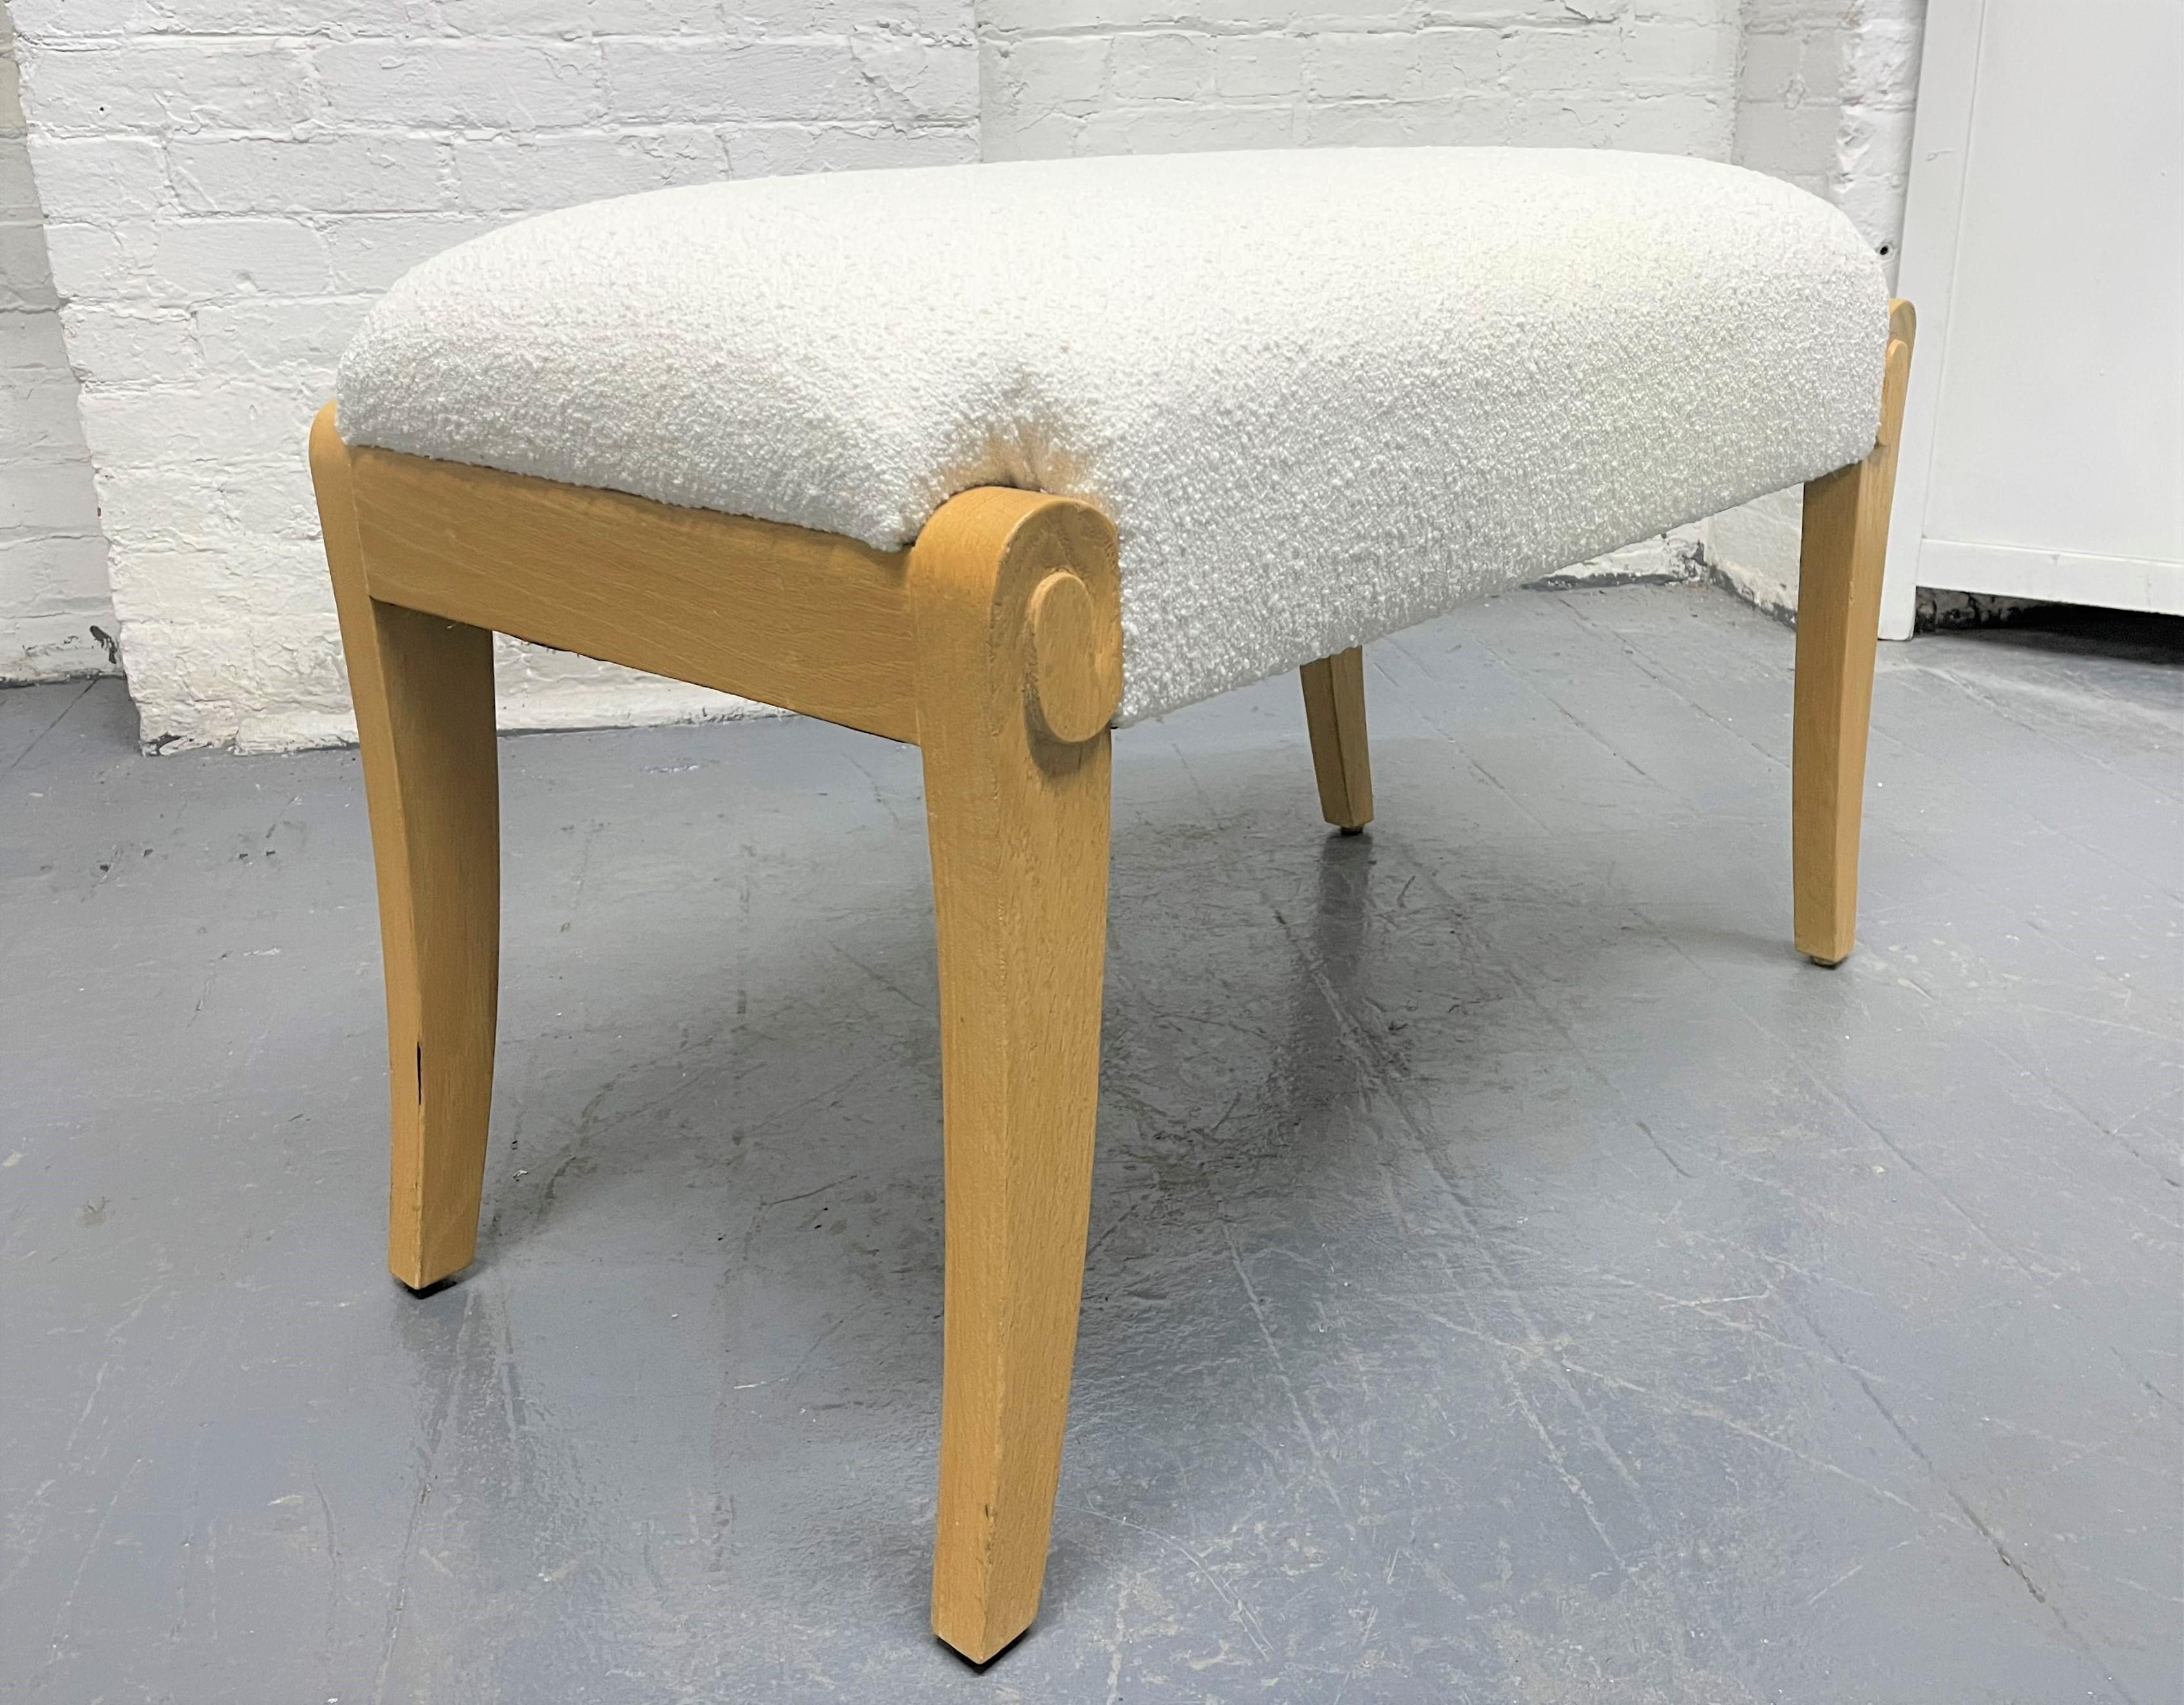 Art Deco style bench by Sally Sirkin Lewis for J. Robert Scott. The bench has a wood frame with an upholstered seat done in boucle.